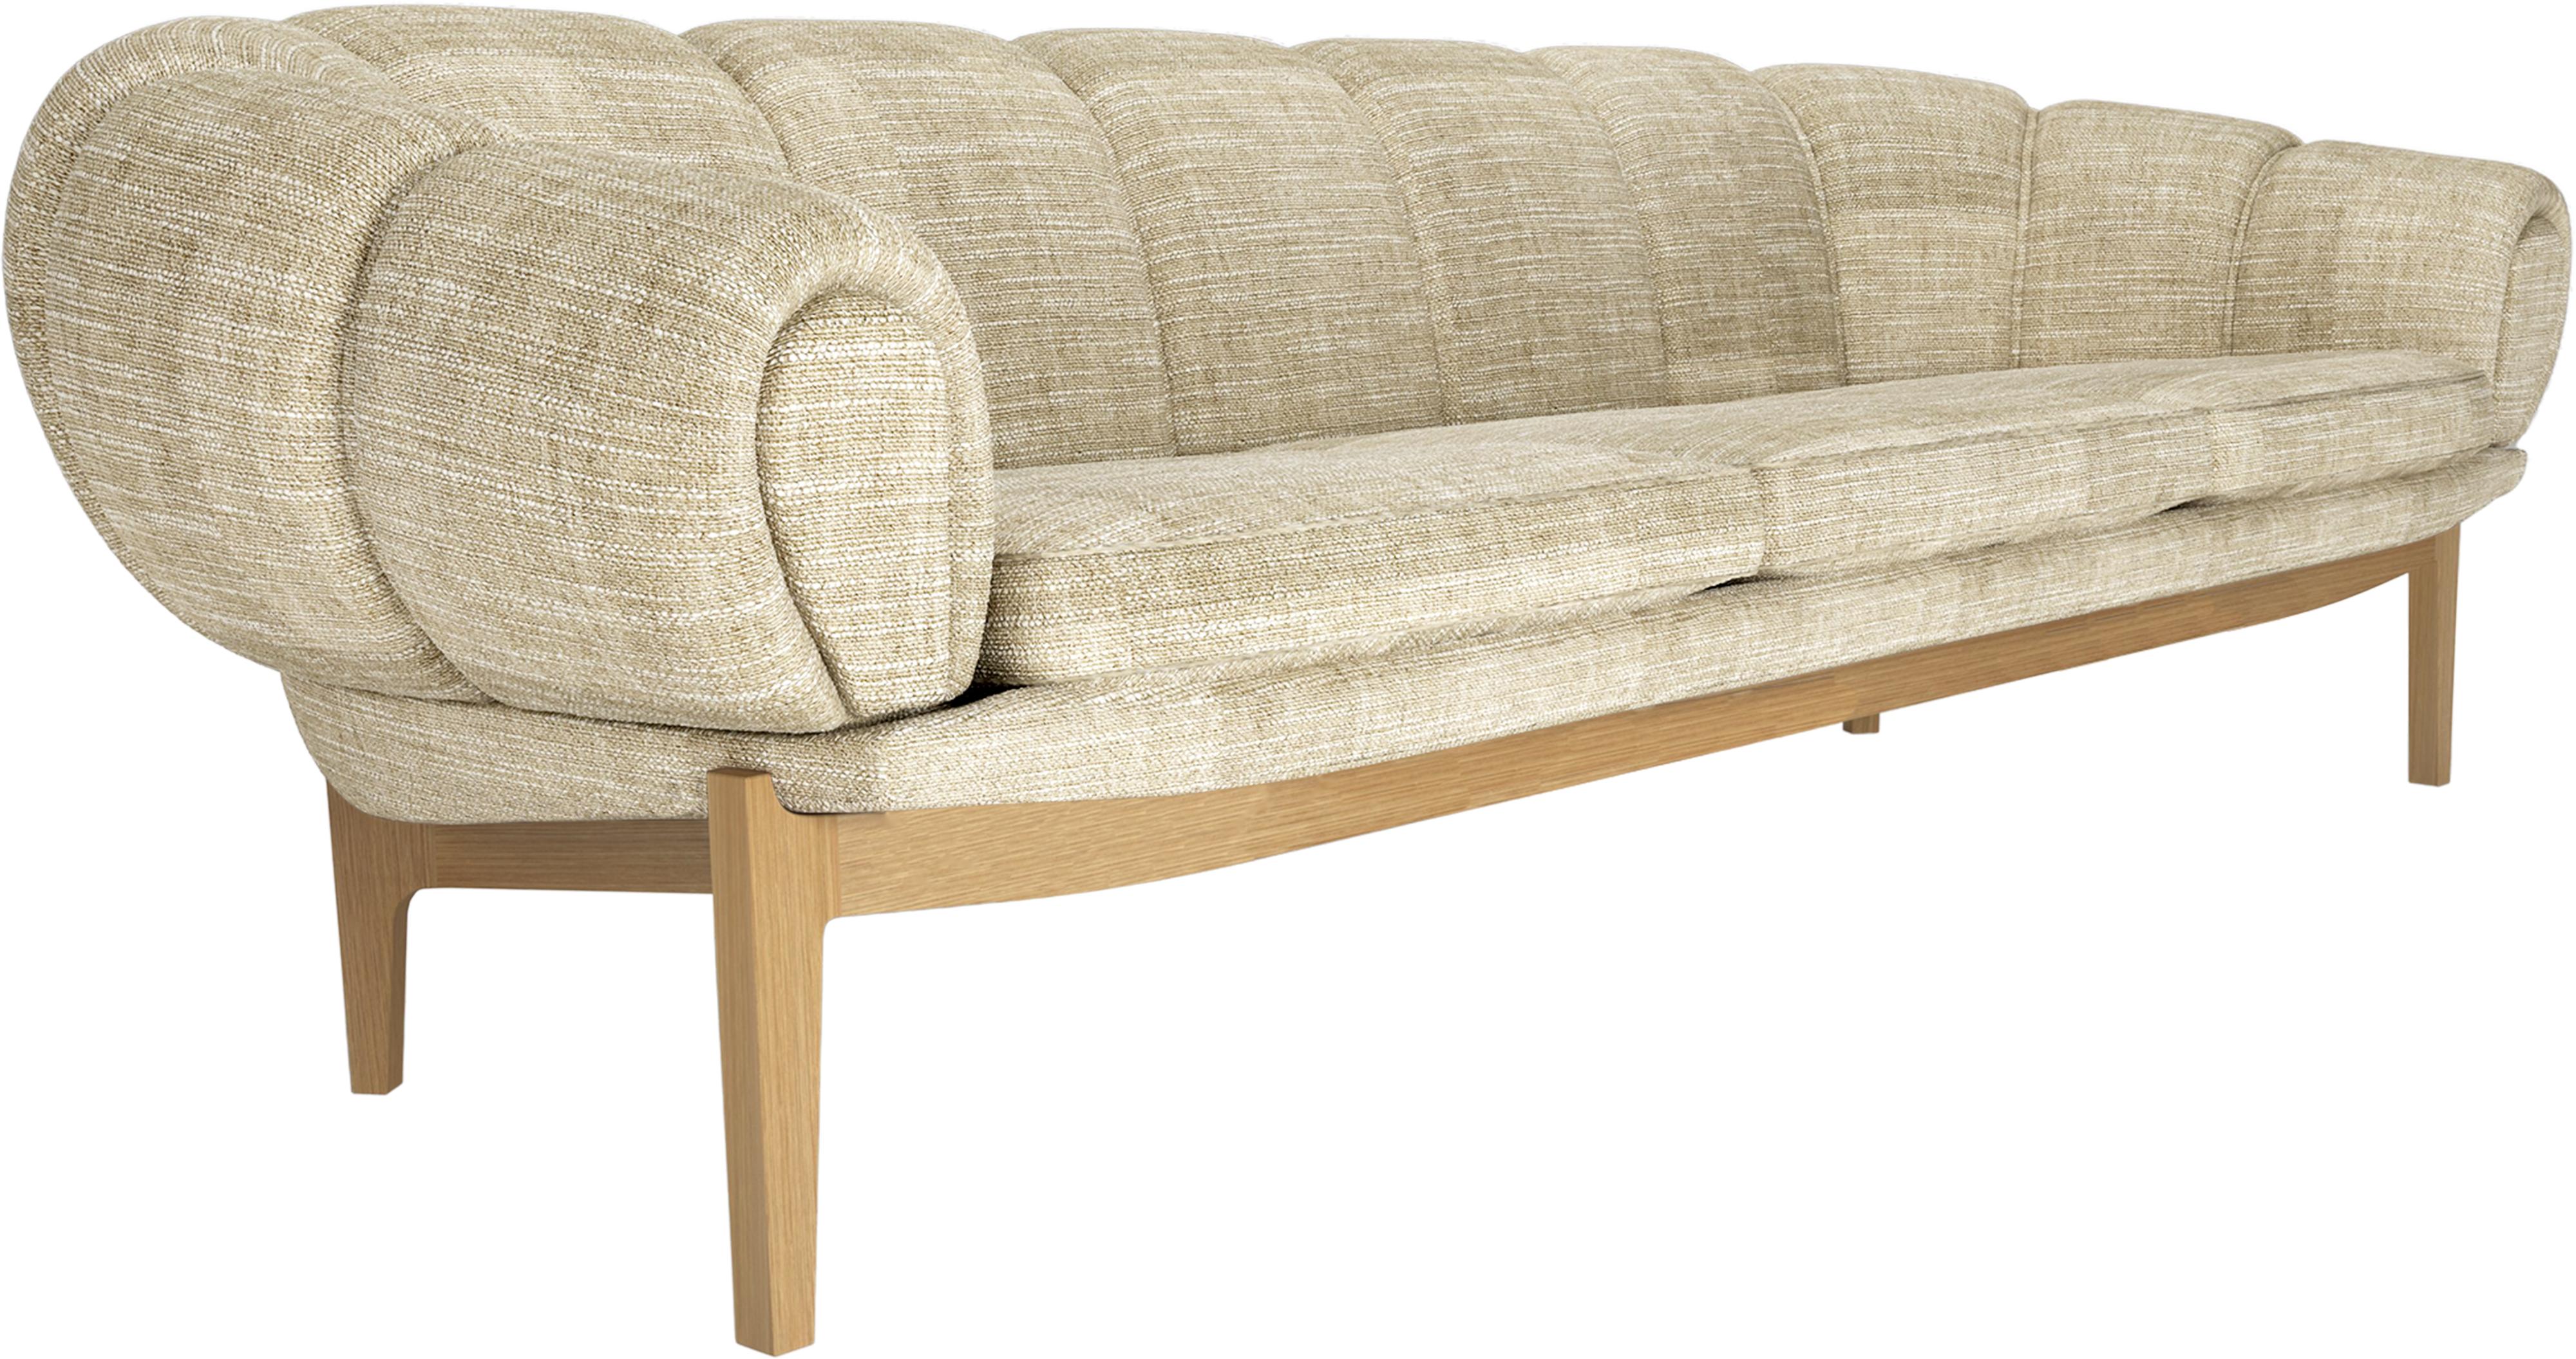 Fabric 'Croissant' Sofa by Illum Wikkelsø for GUBI with Walnut Legs For Sale 6